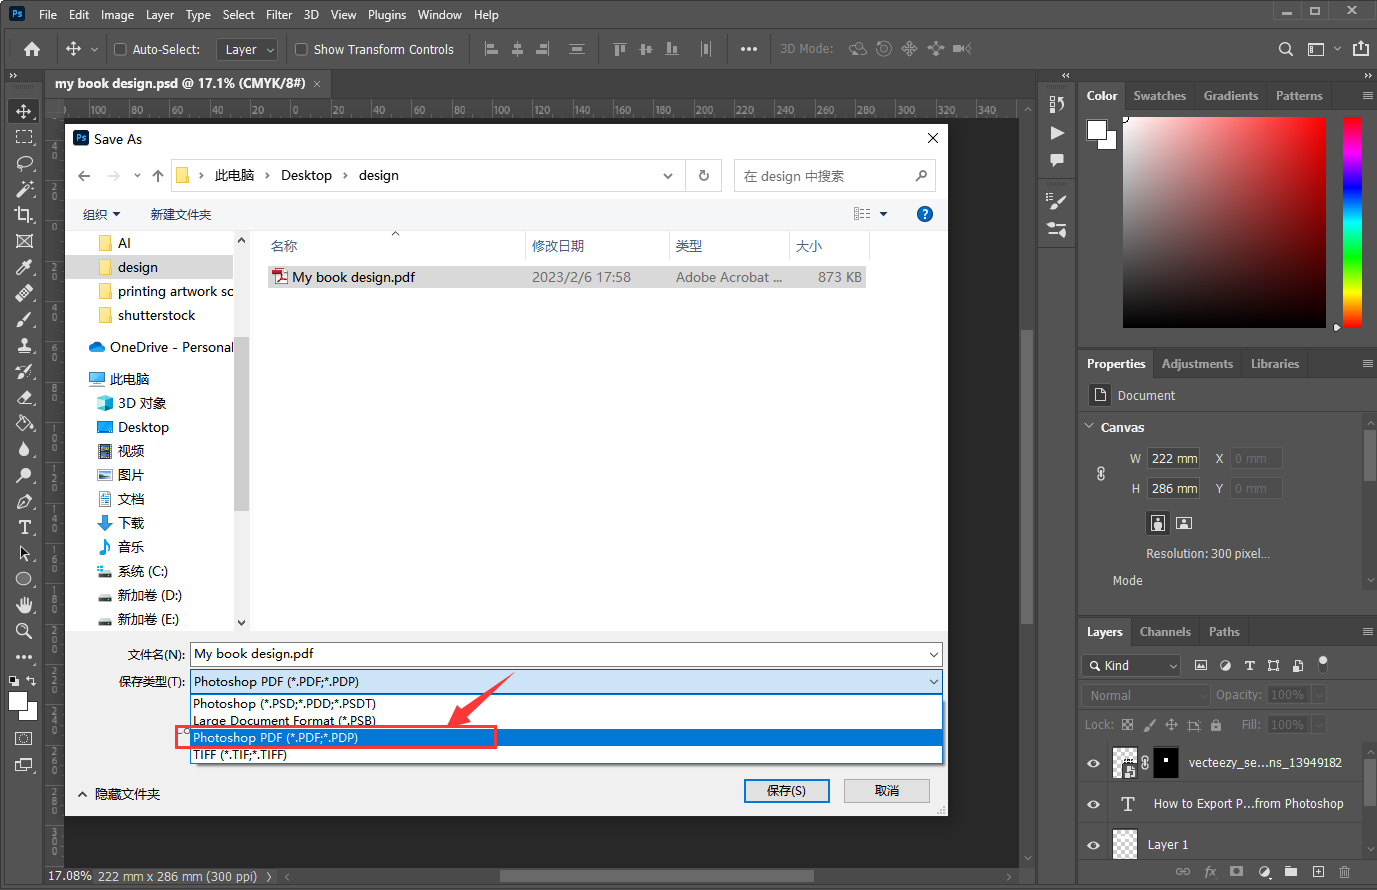 How to Export PDFs from Photoshop Step 2